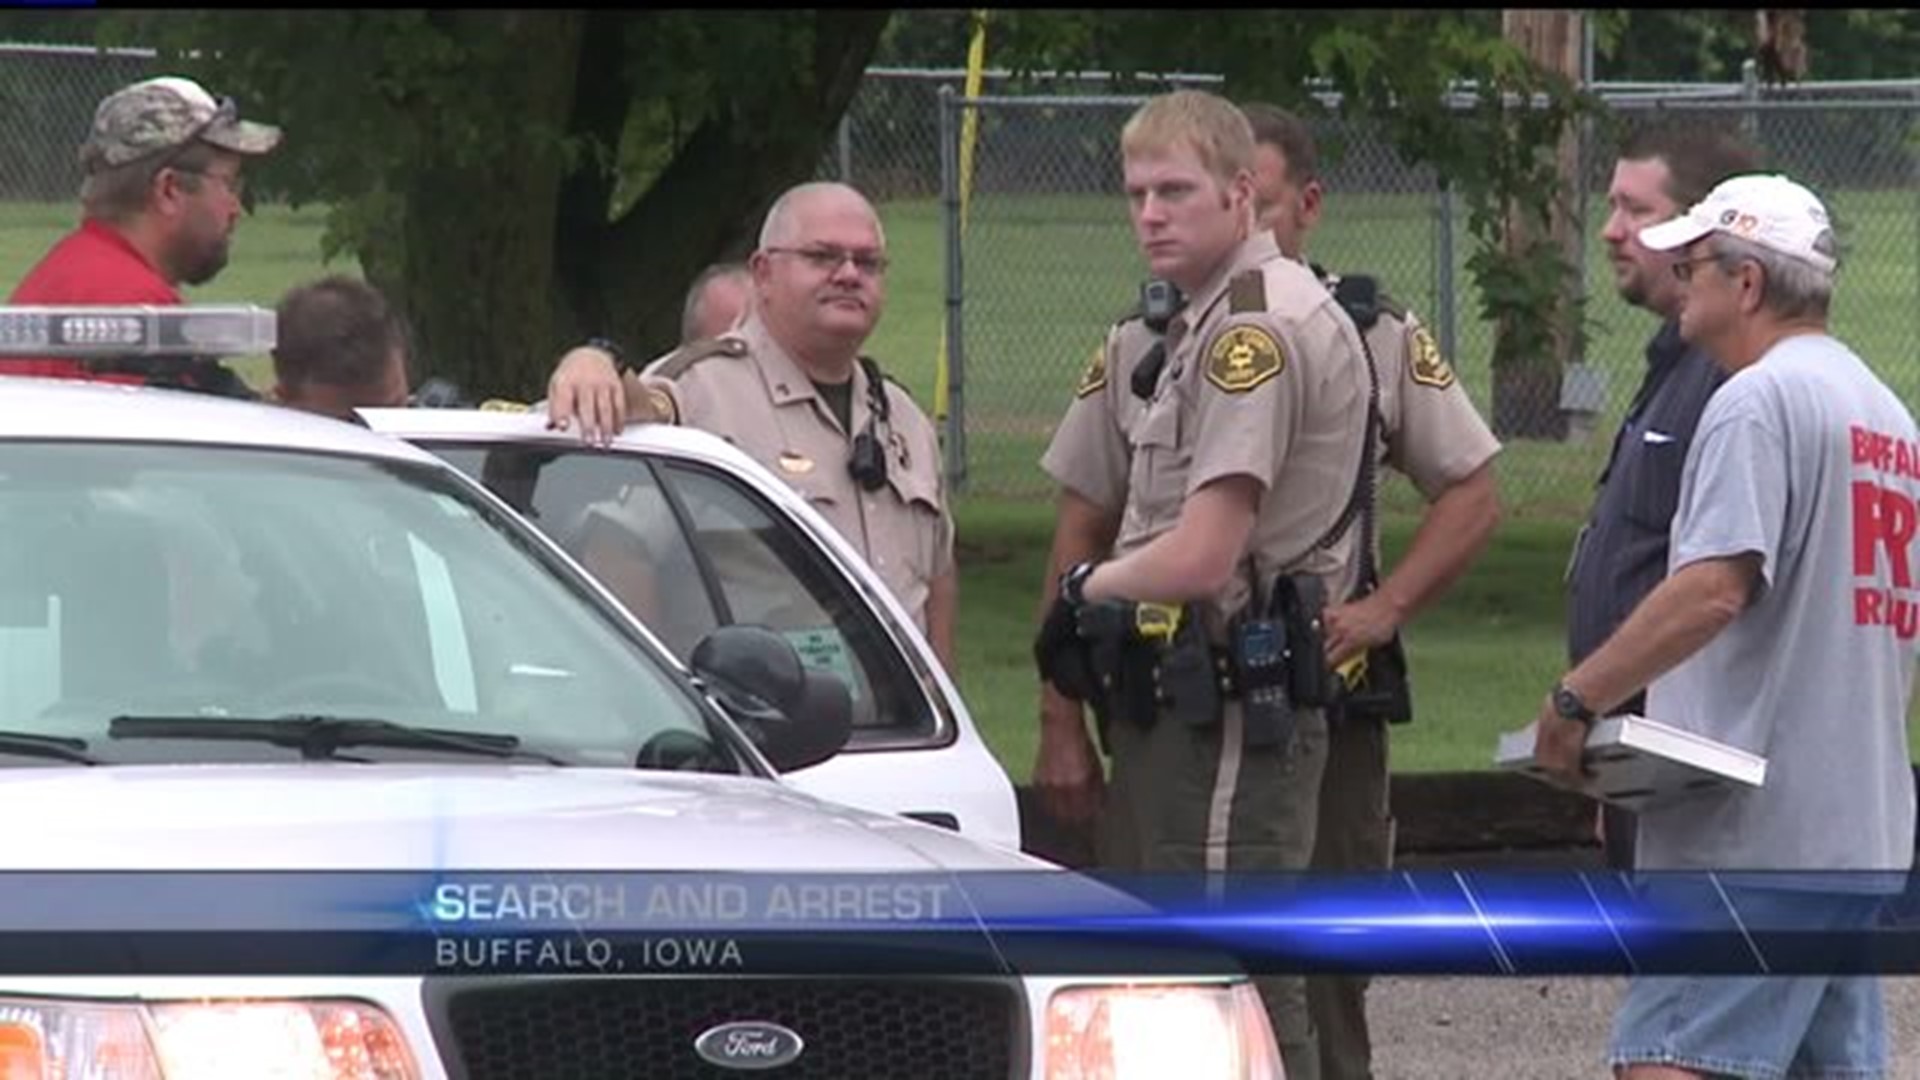 Search and arrest in Buffalo